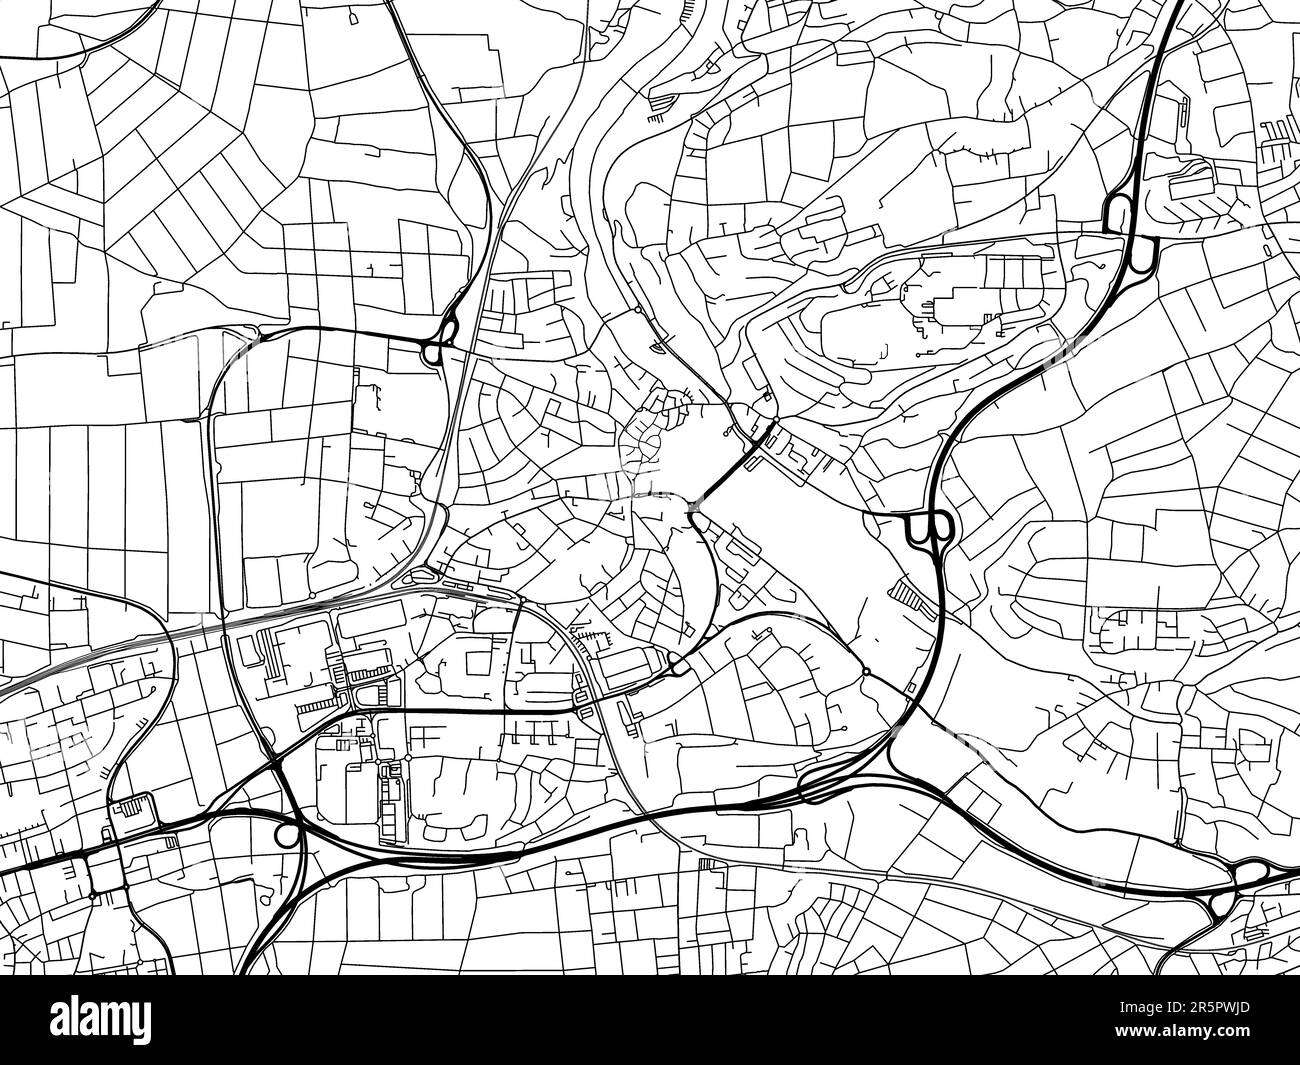 Vector road map of the city of  Waiblingen in Germany on a white background. Stock Photo